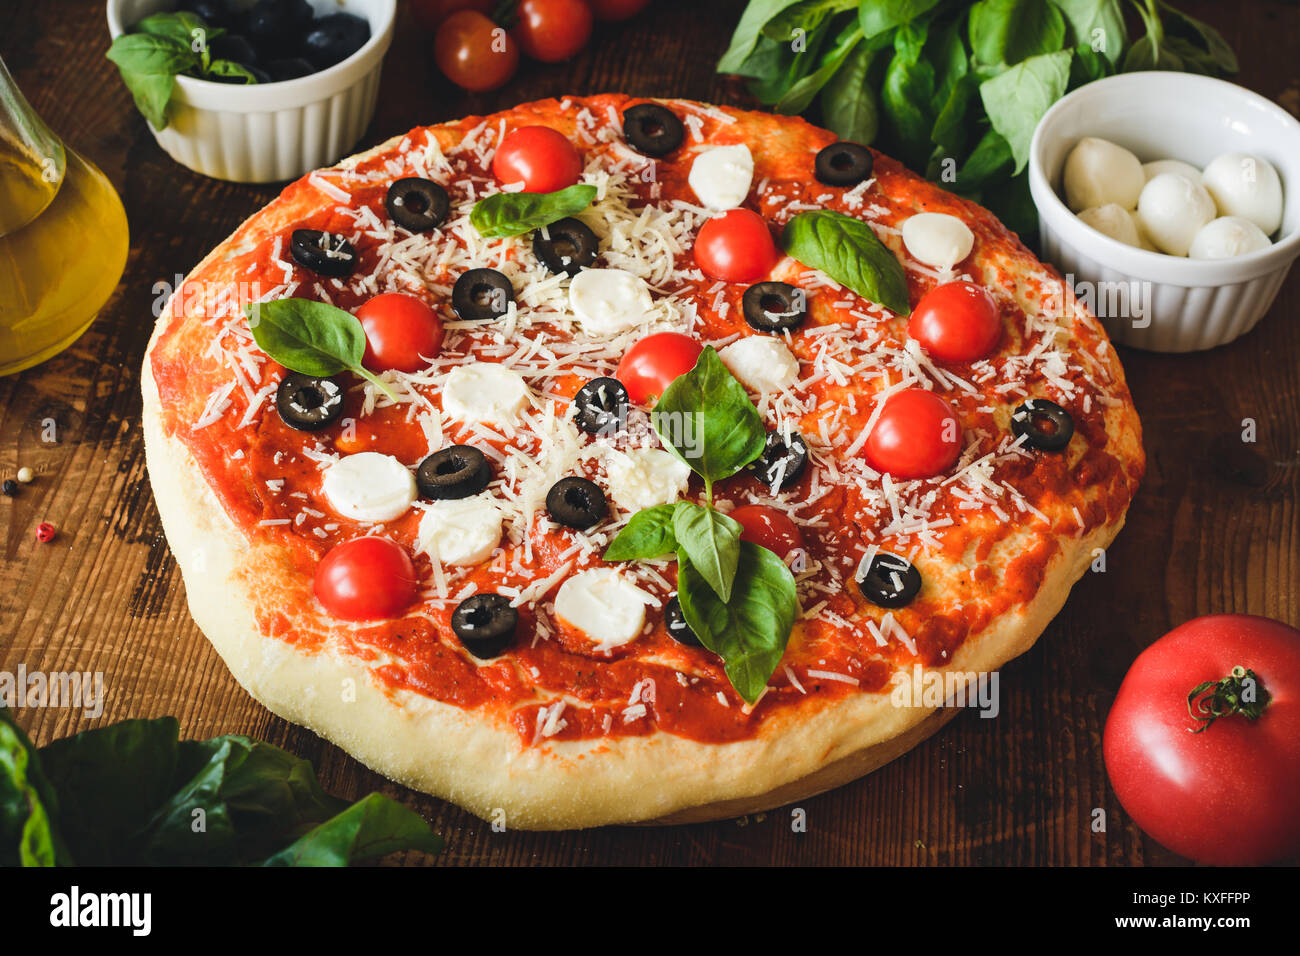 Homemade italian pizza with black olives, cherry tomatoes, cheese and basil on wooden board. Closeup view Stock Photo